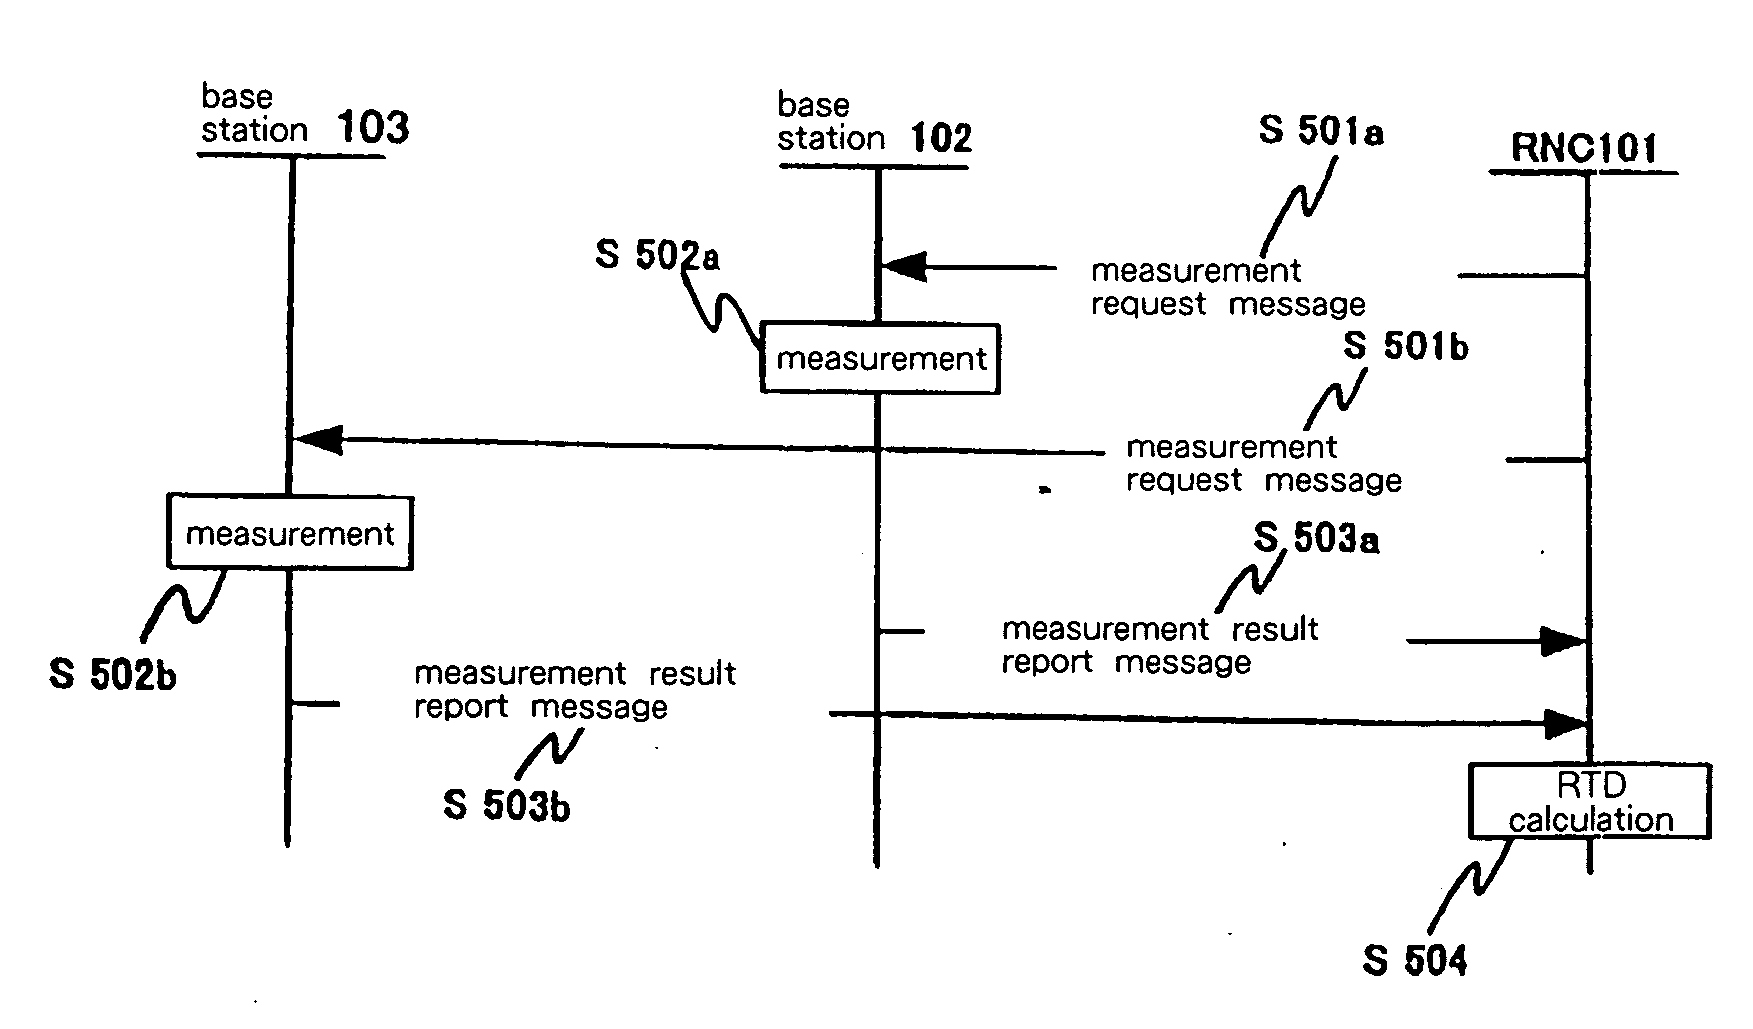 Transmission time difference measurement method and system